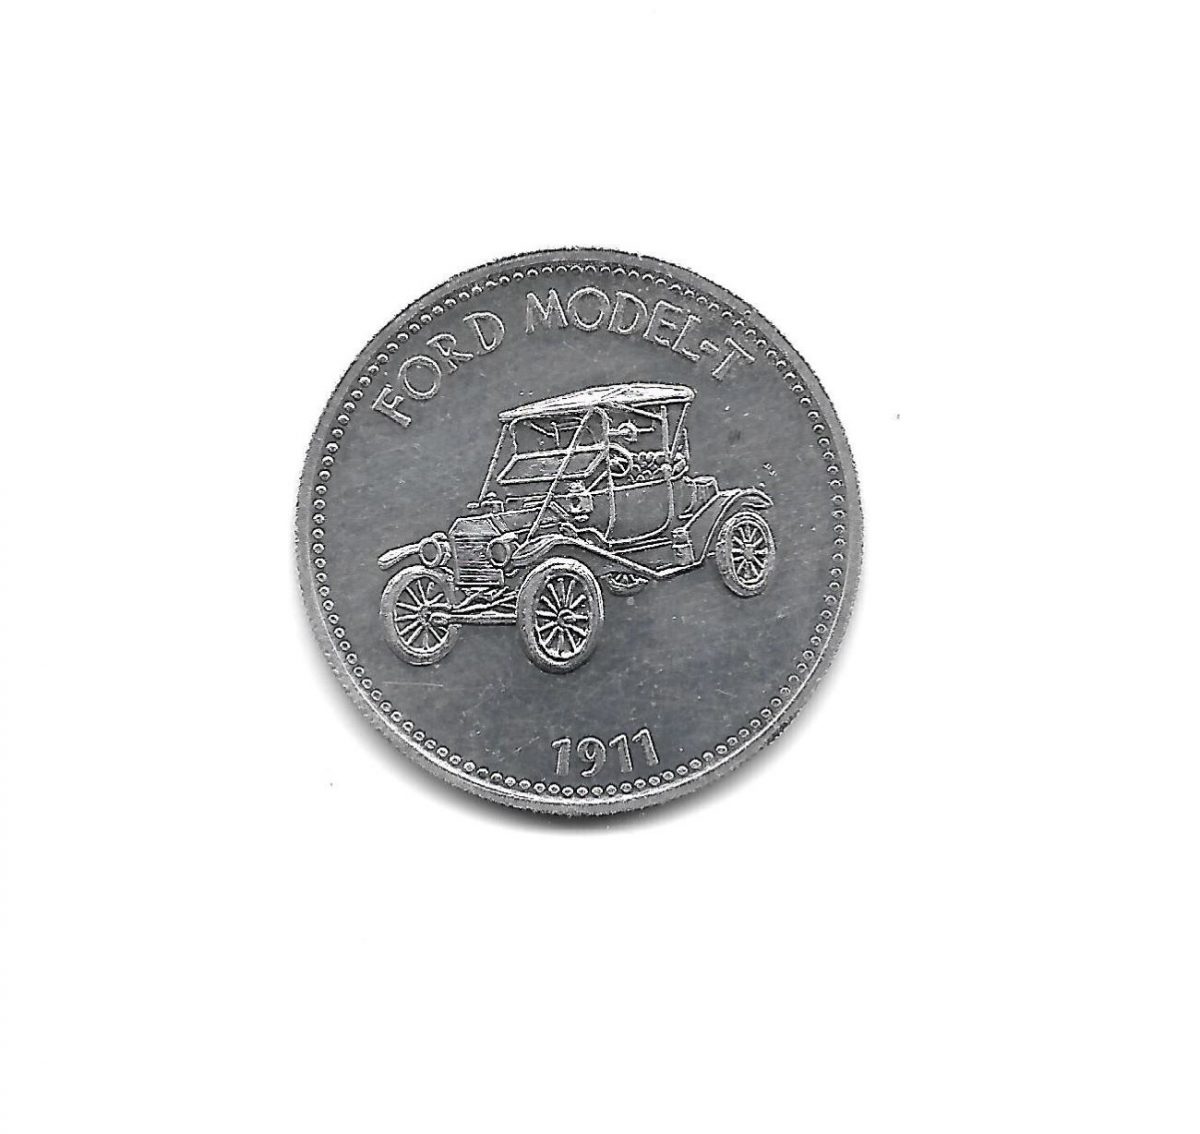 Historic Cars, Shell, Collectible Coins, 1970s, vintage